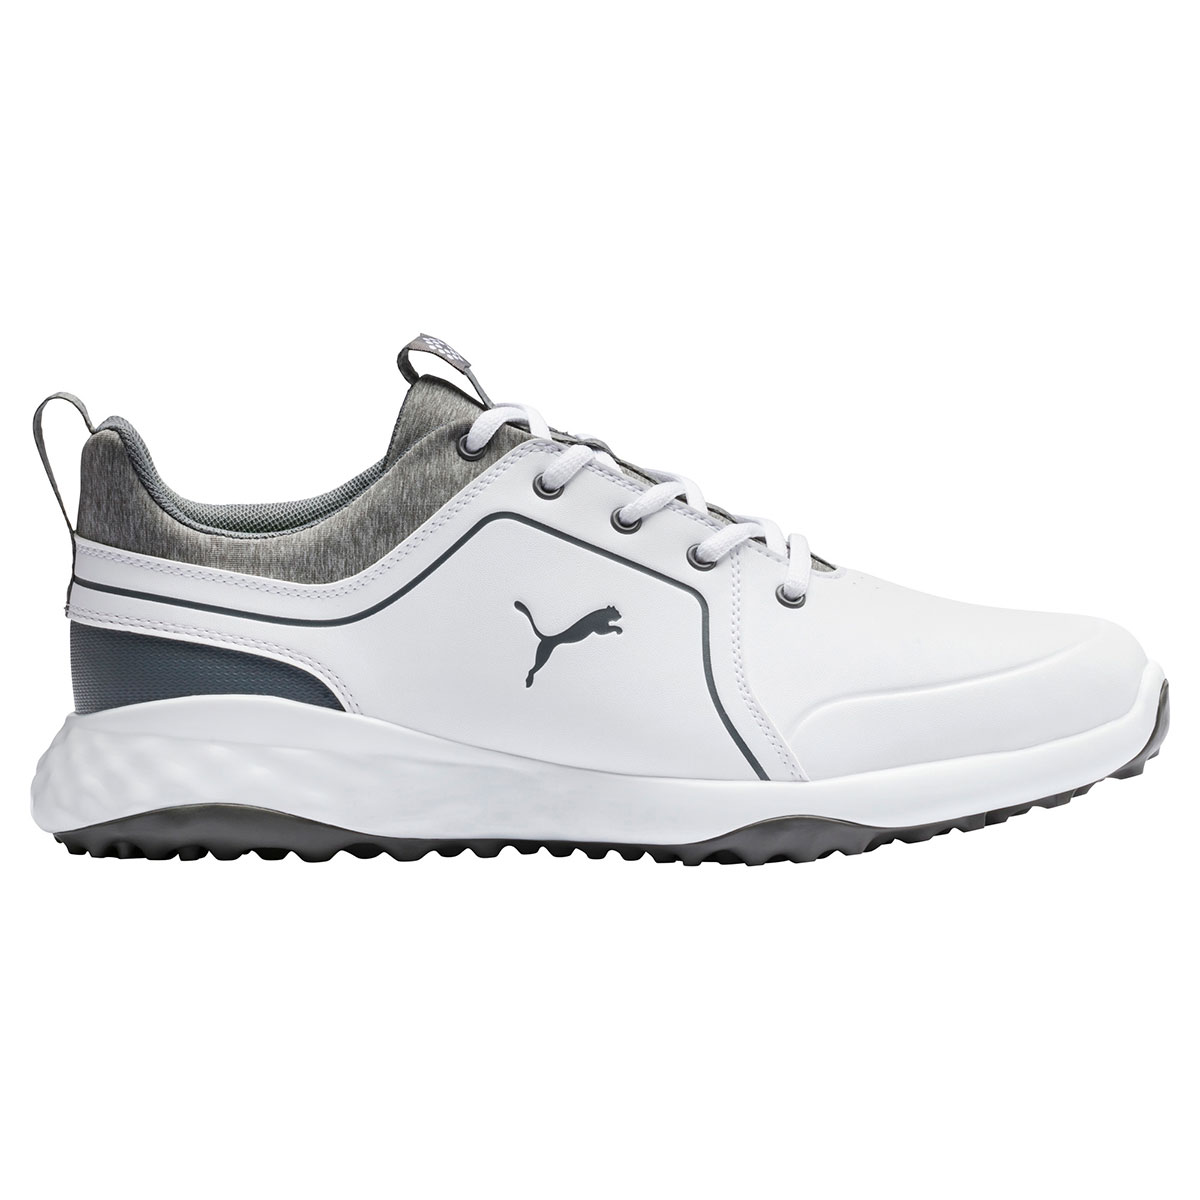 PUMA Golf Grip Fusion 2.0 Shoes from 